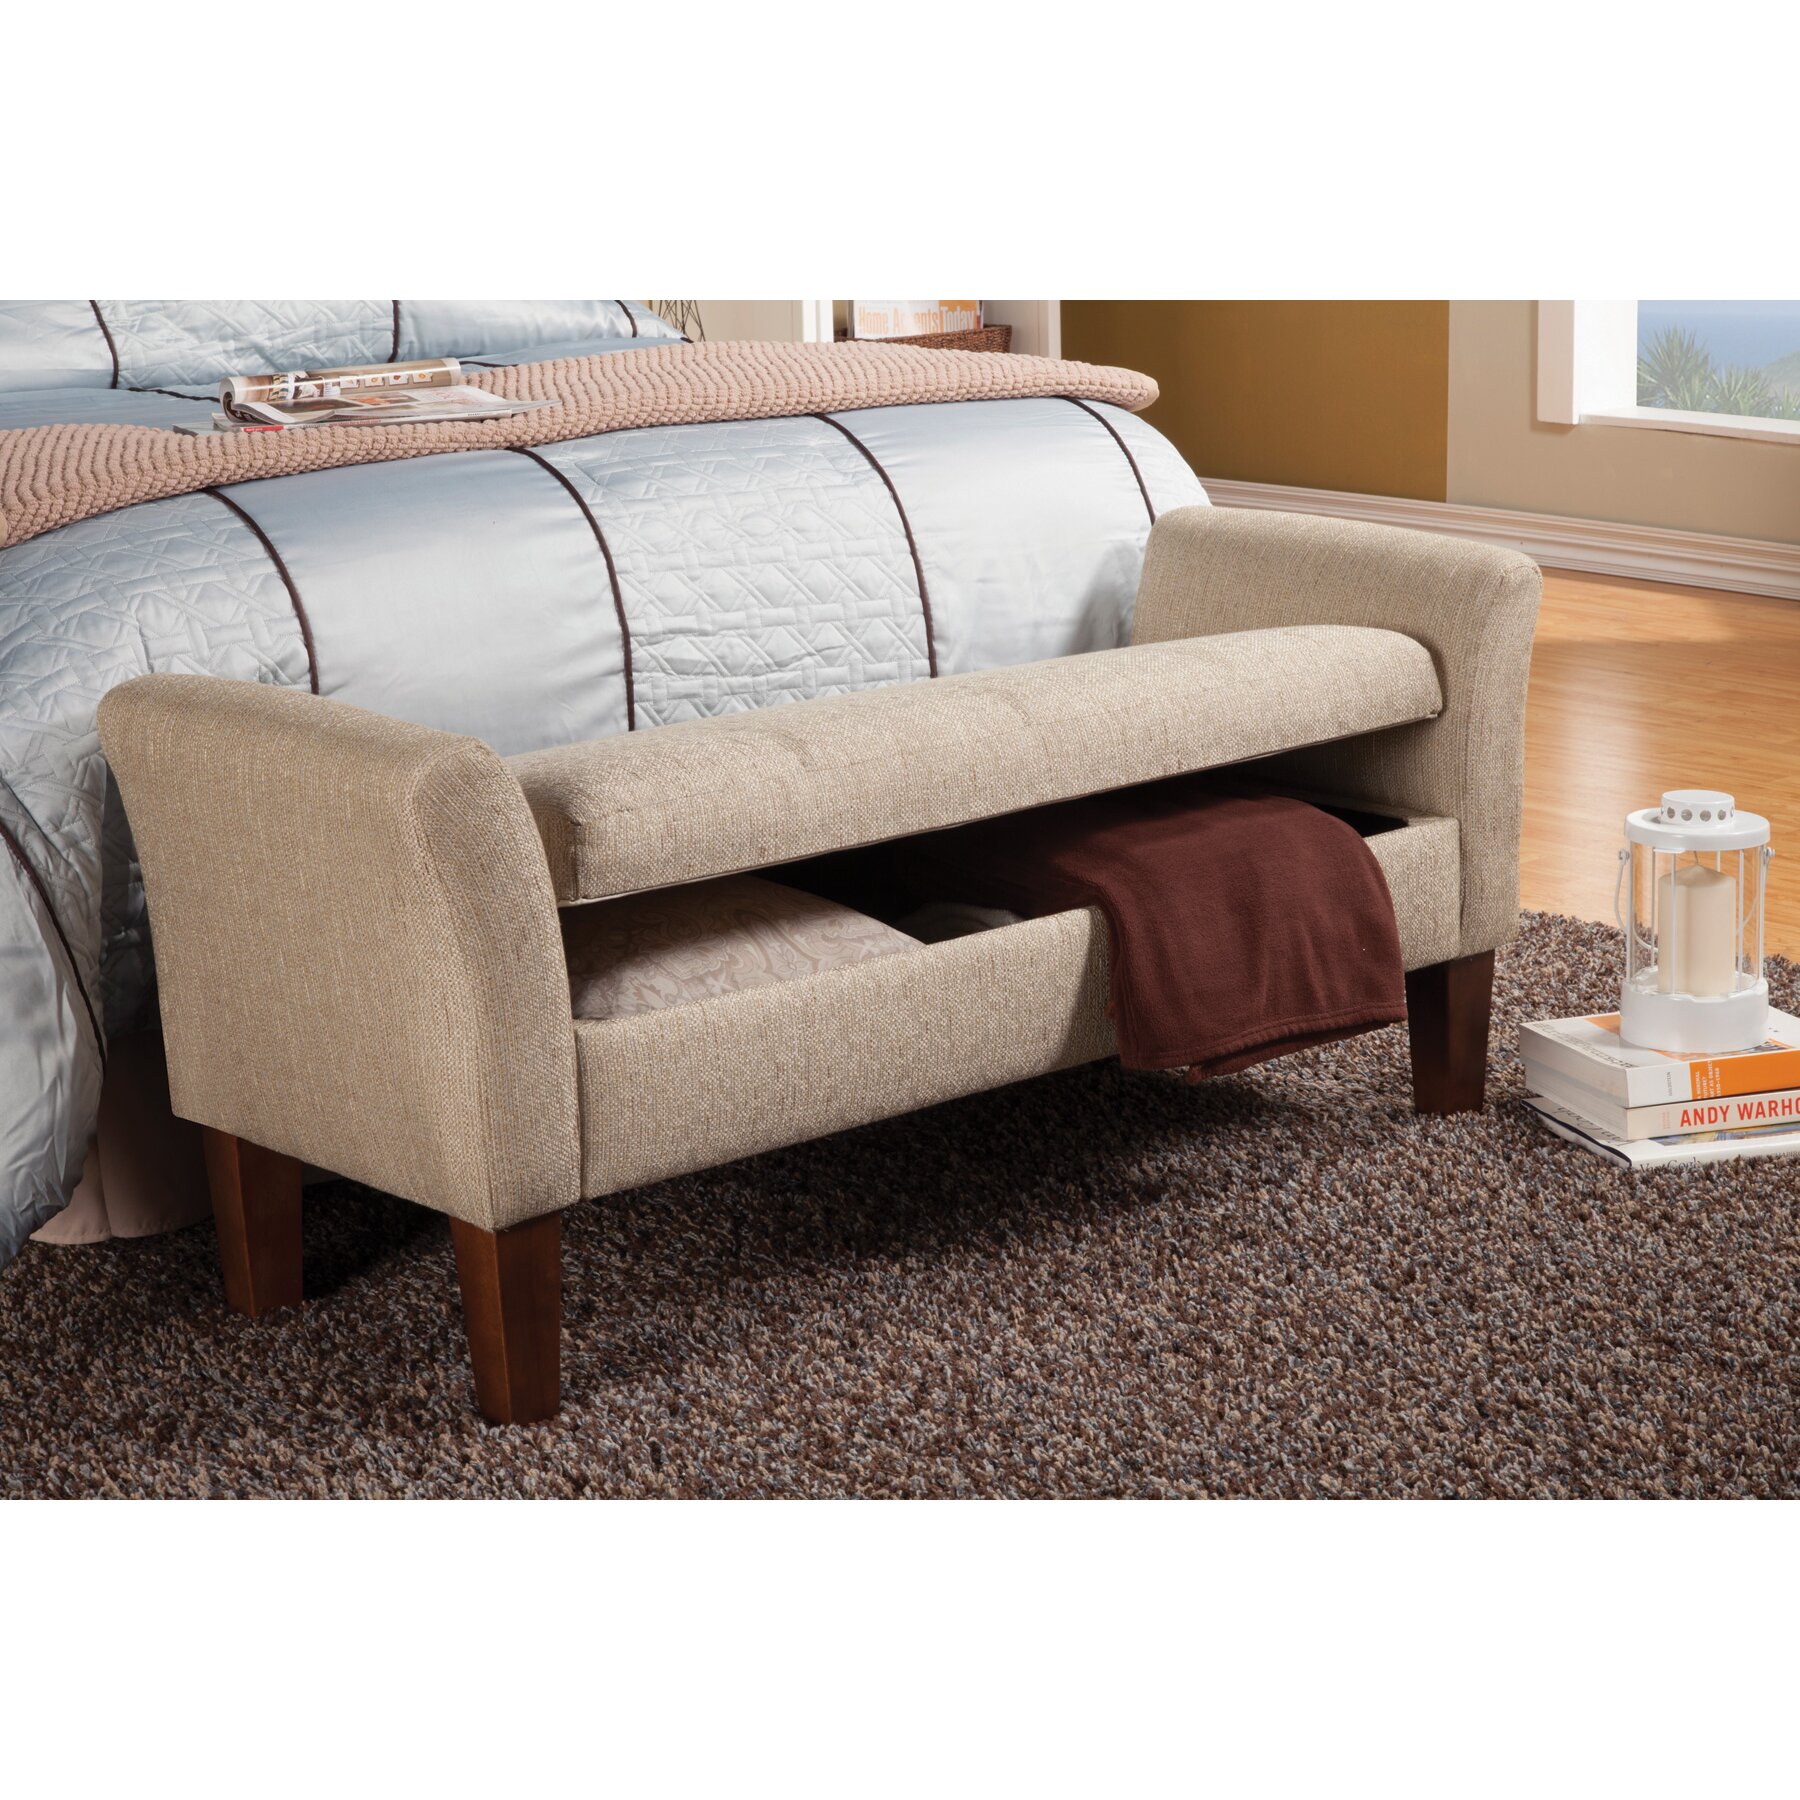 Creating A Cozy Space With A Bedroom Upholstered Bench